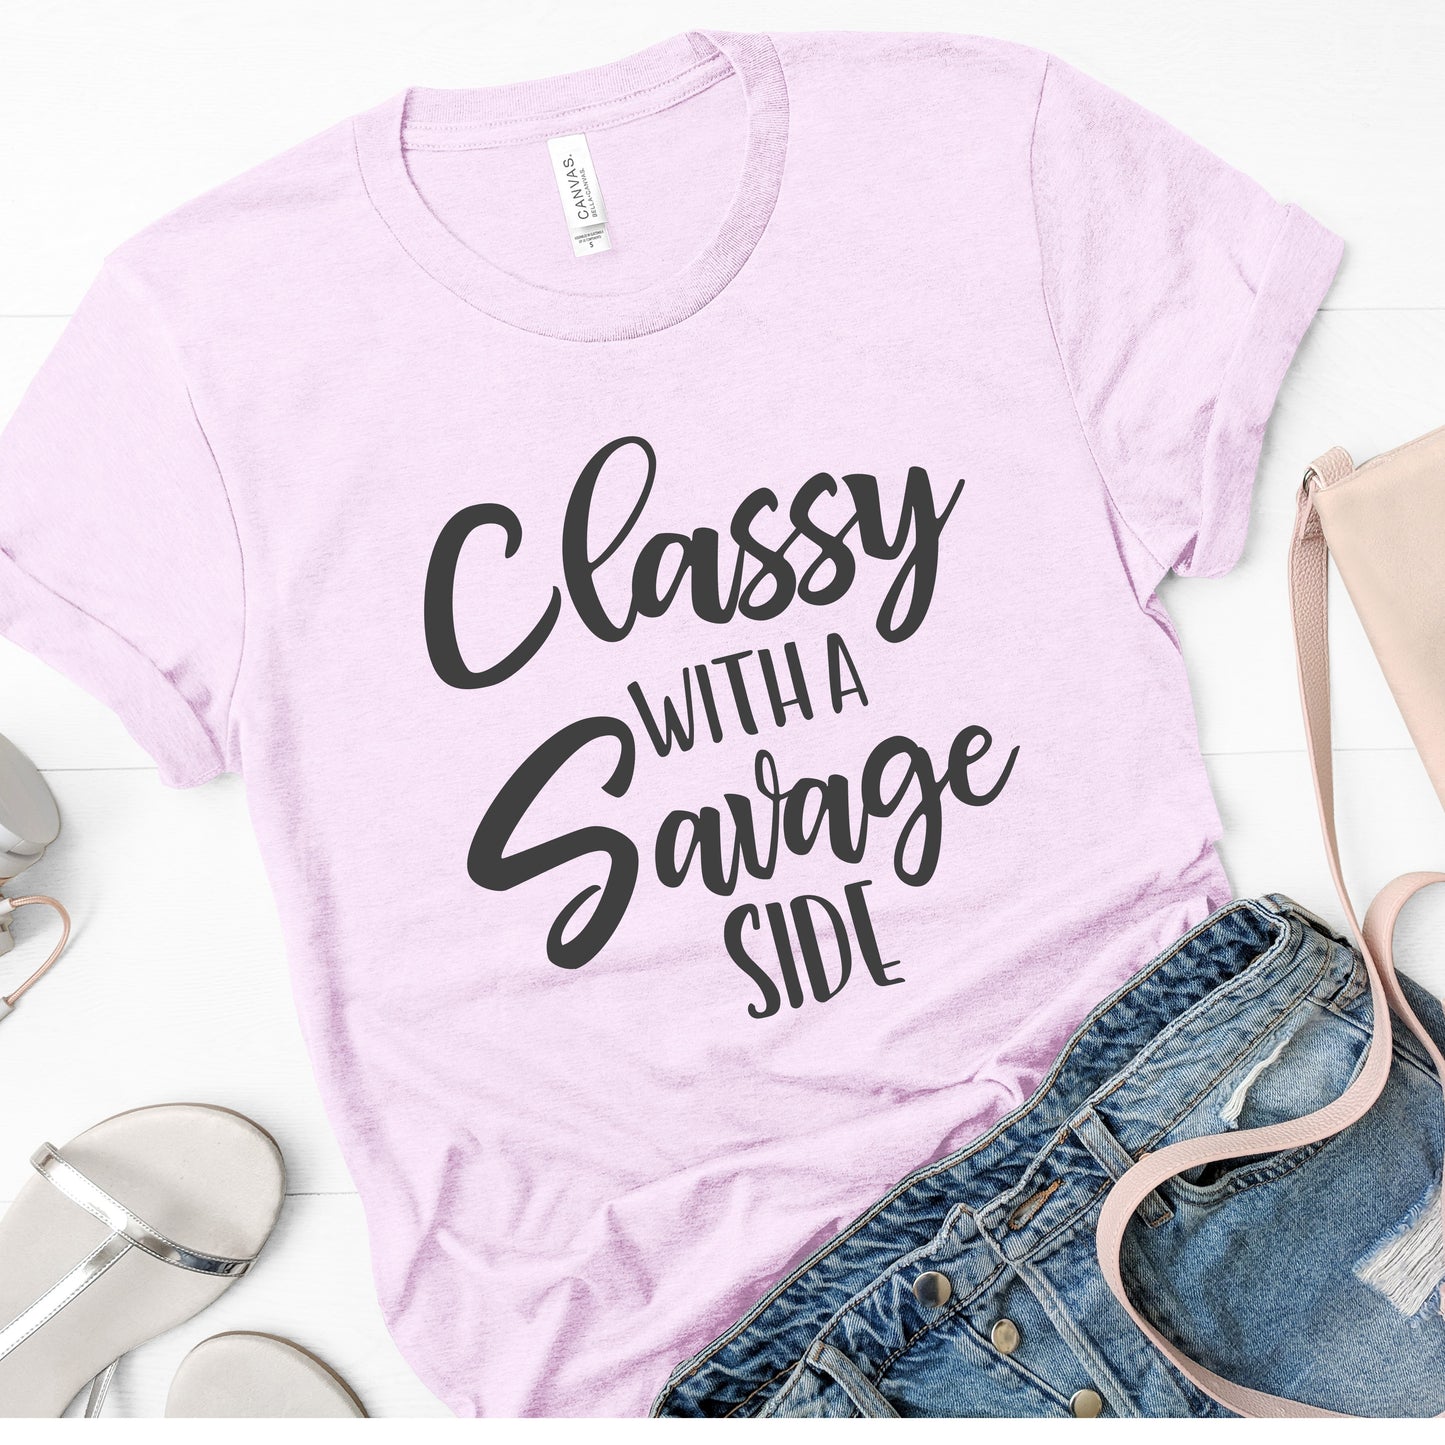 "Classy with a Savage Side" Tee